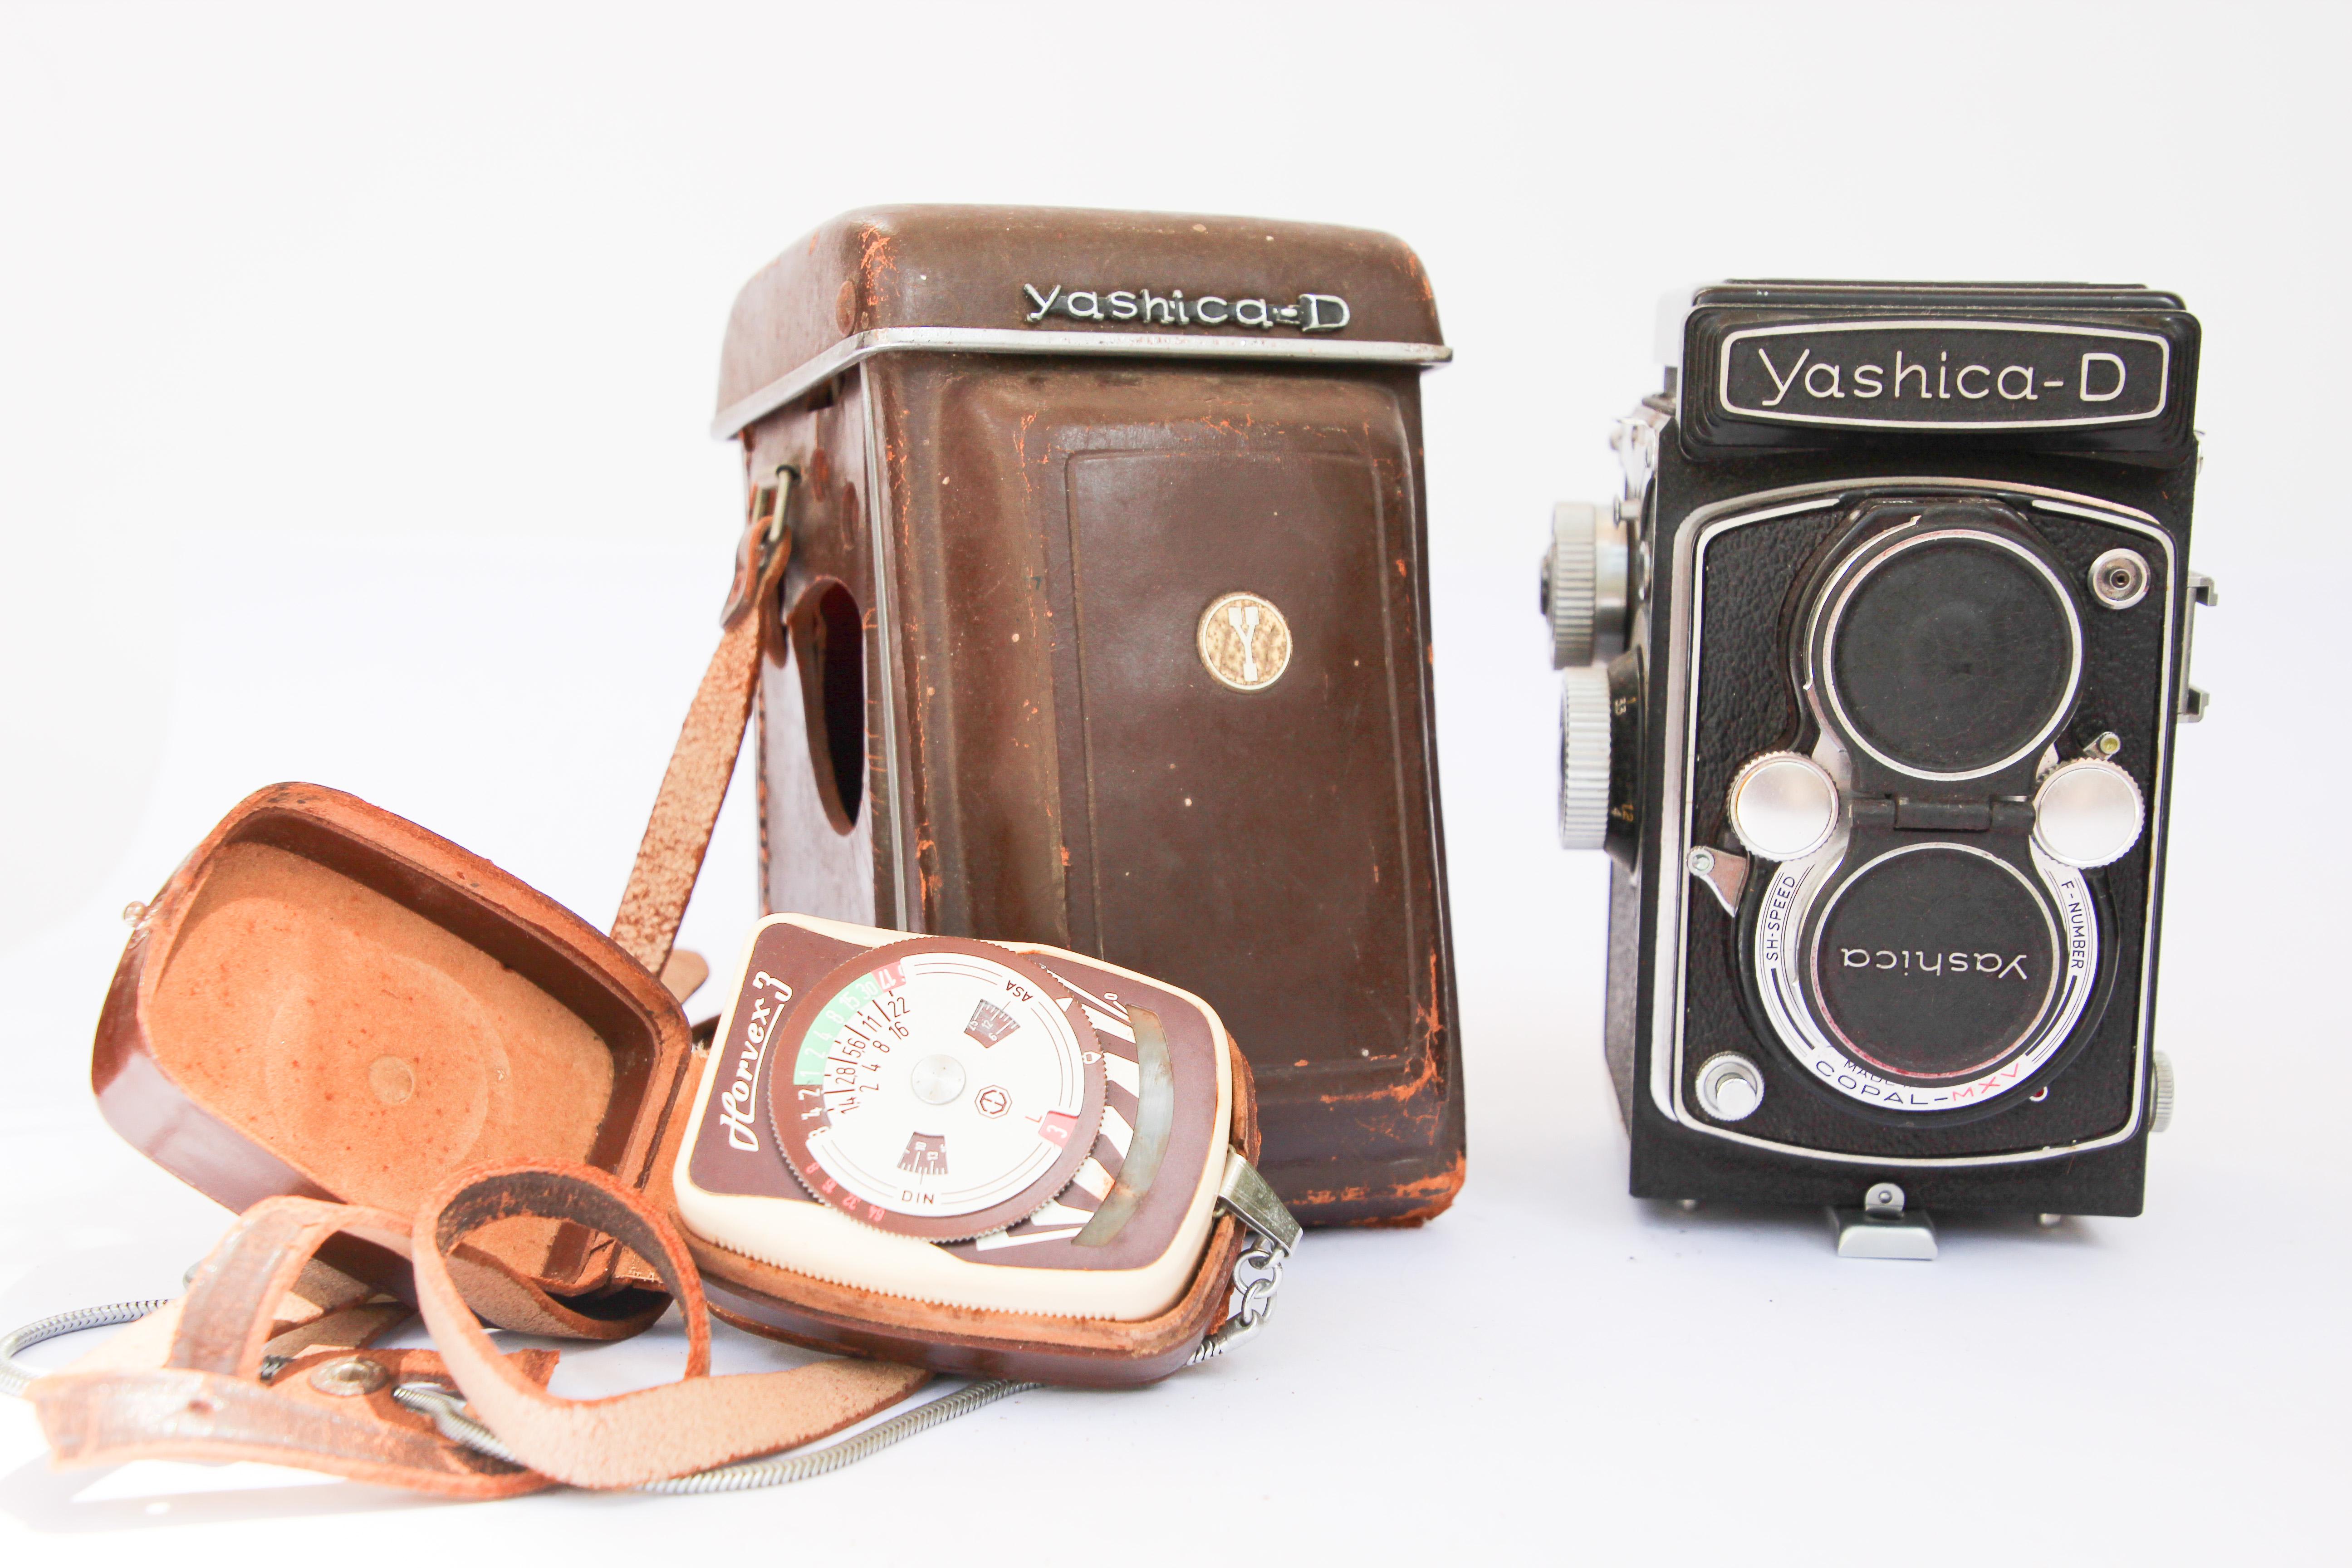 Metal Yashica-D Camera with Case and Accessories, circa 1958